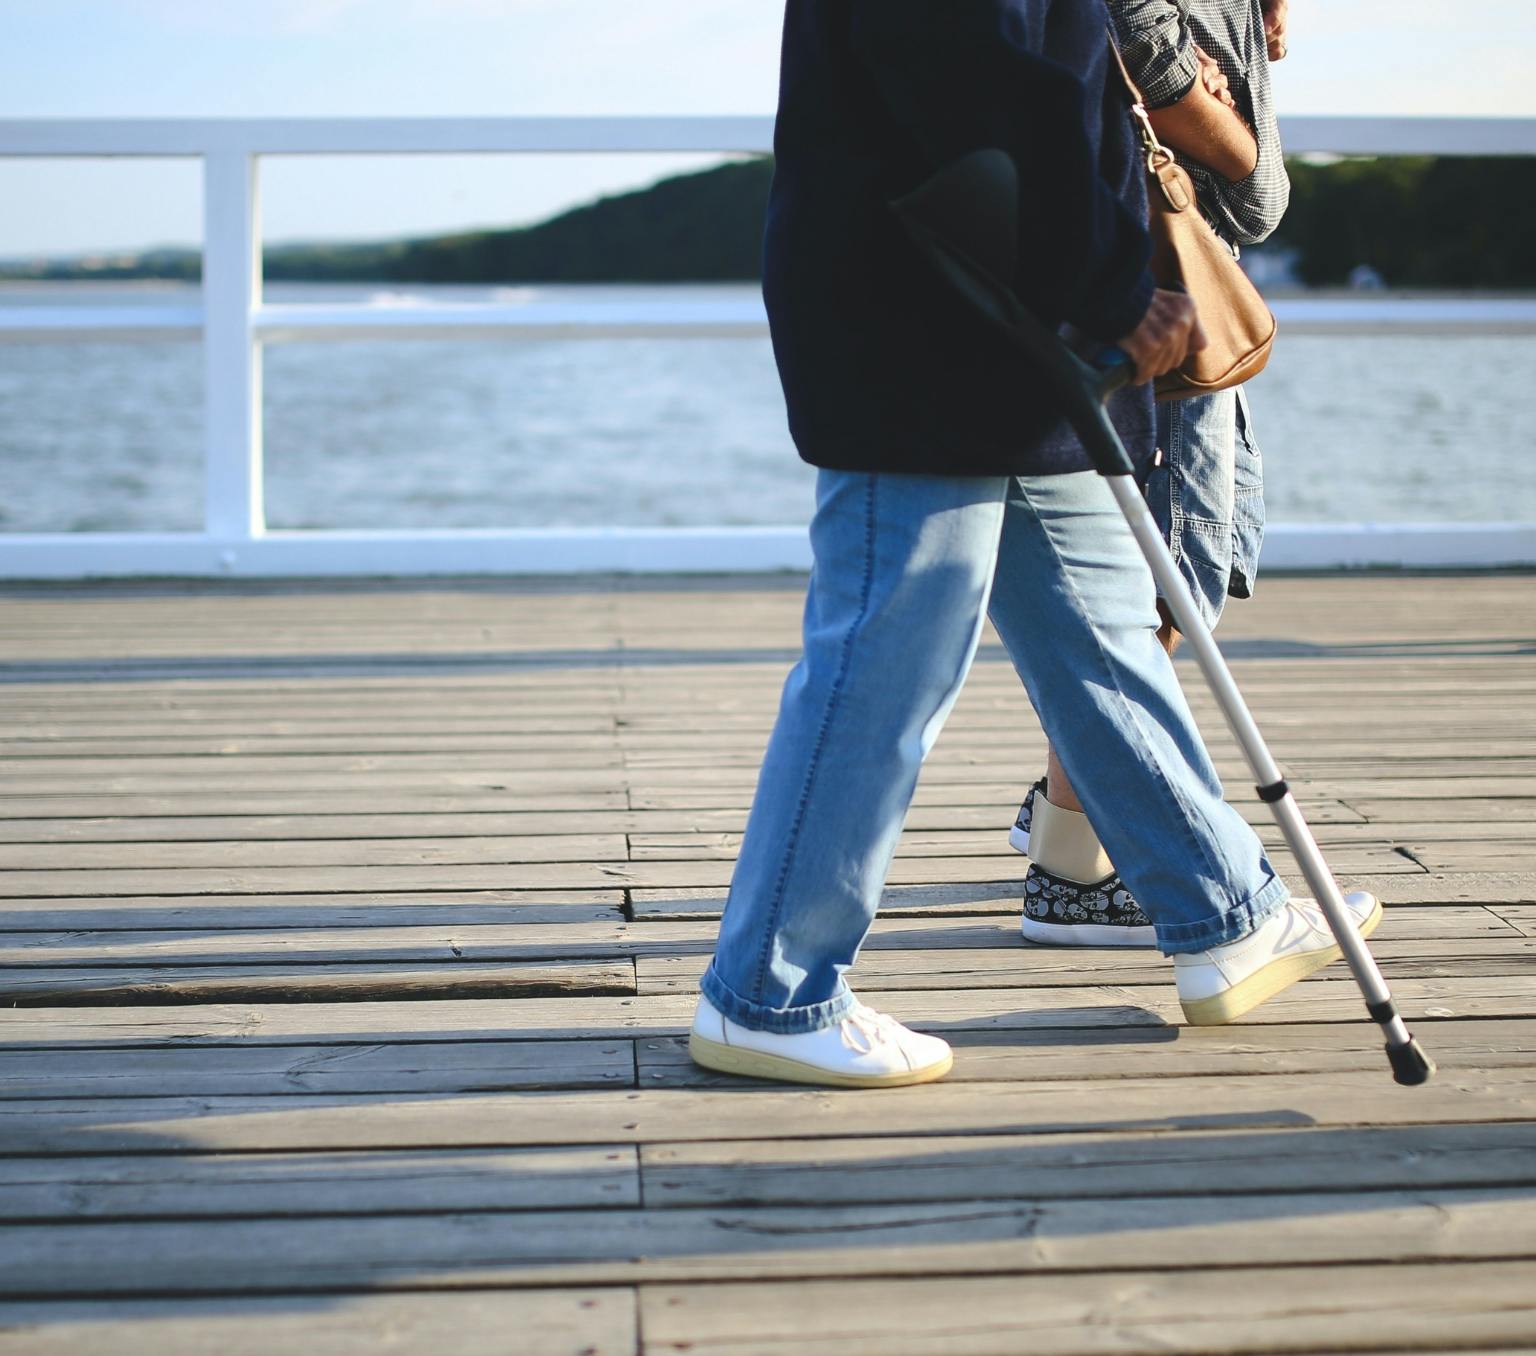 two people walking on a wooden pier over water. One person is using a walking stick